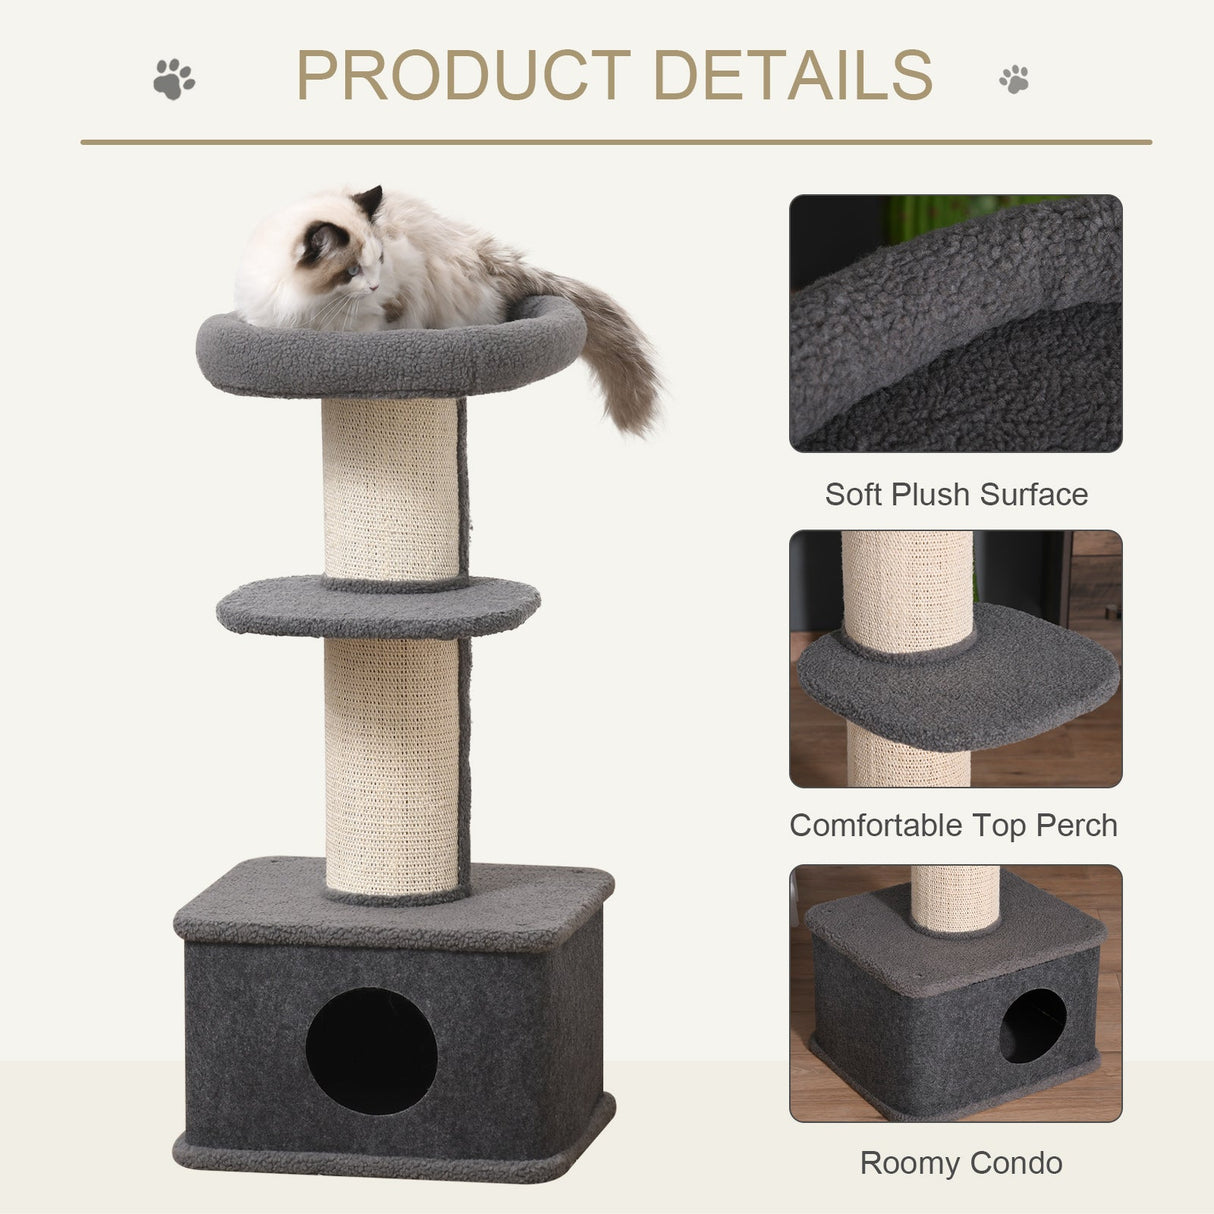 96cm Cat Tree for Indoor Cats Kitten Tower Multi level Activity Center Pet Furniture with Sisal Scratching Post Condo Removable Cover Grey, PawHut,